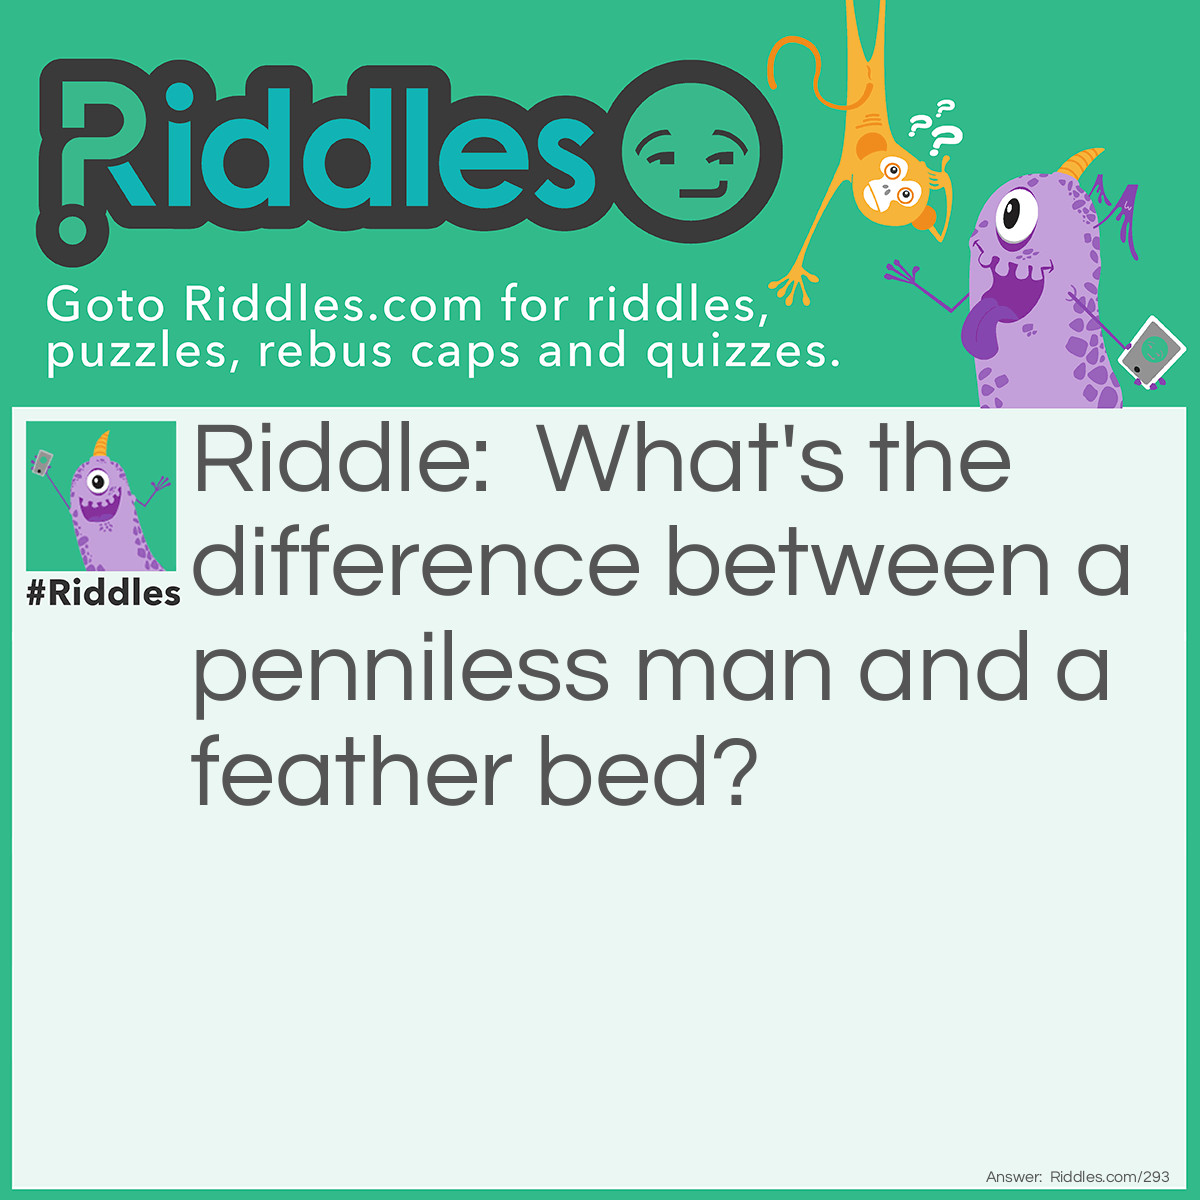 Riddle: What's the difference between a penniless man and a feather bed? Answer: One is hard up, while the other is soft down.